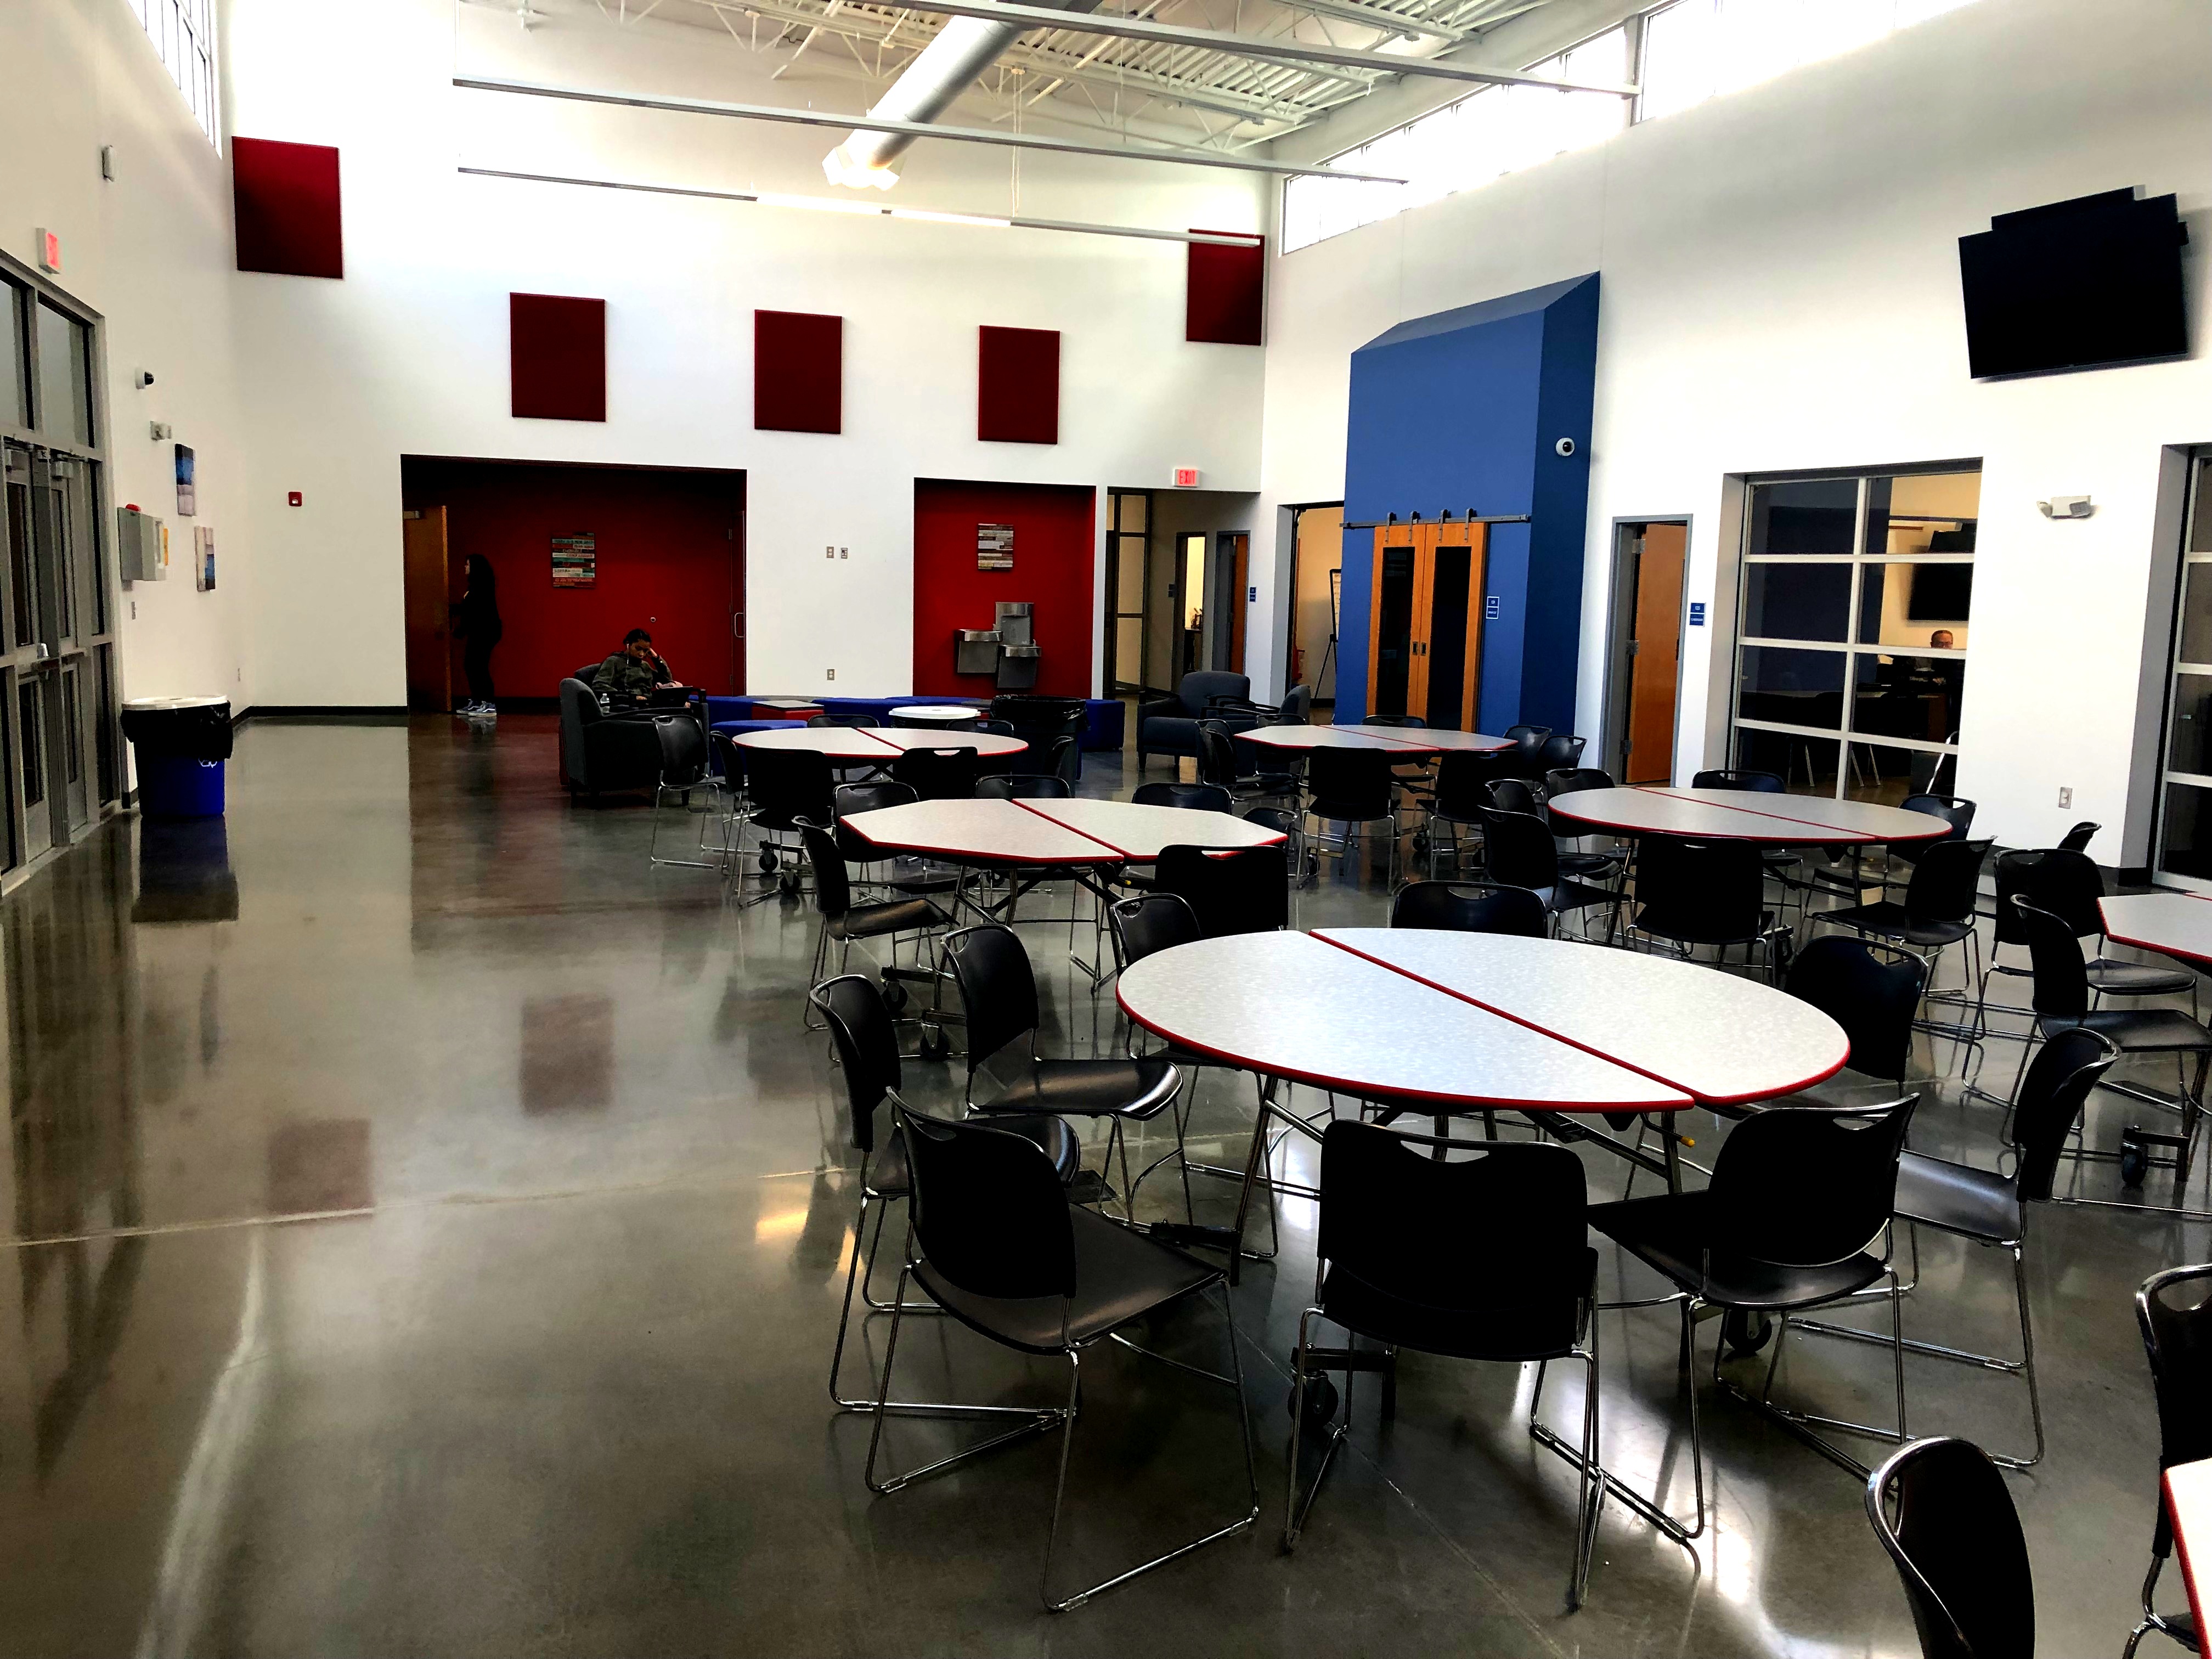 The lunchroom area of the Performance Learning Center